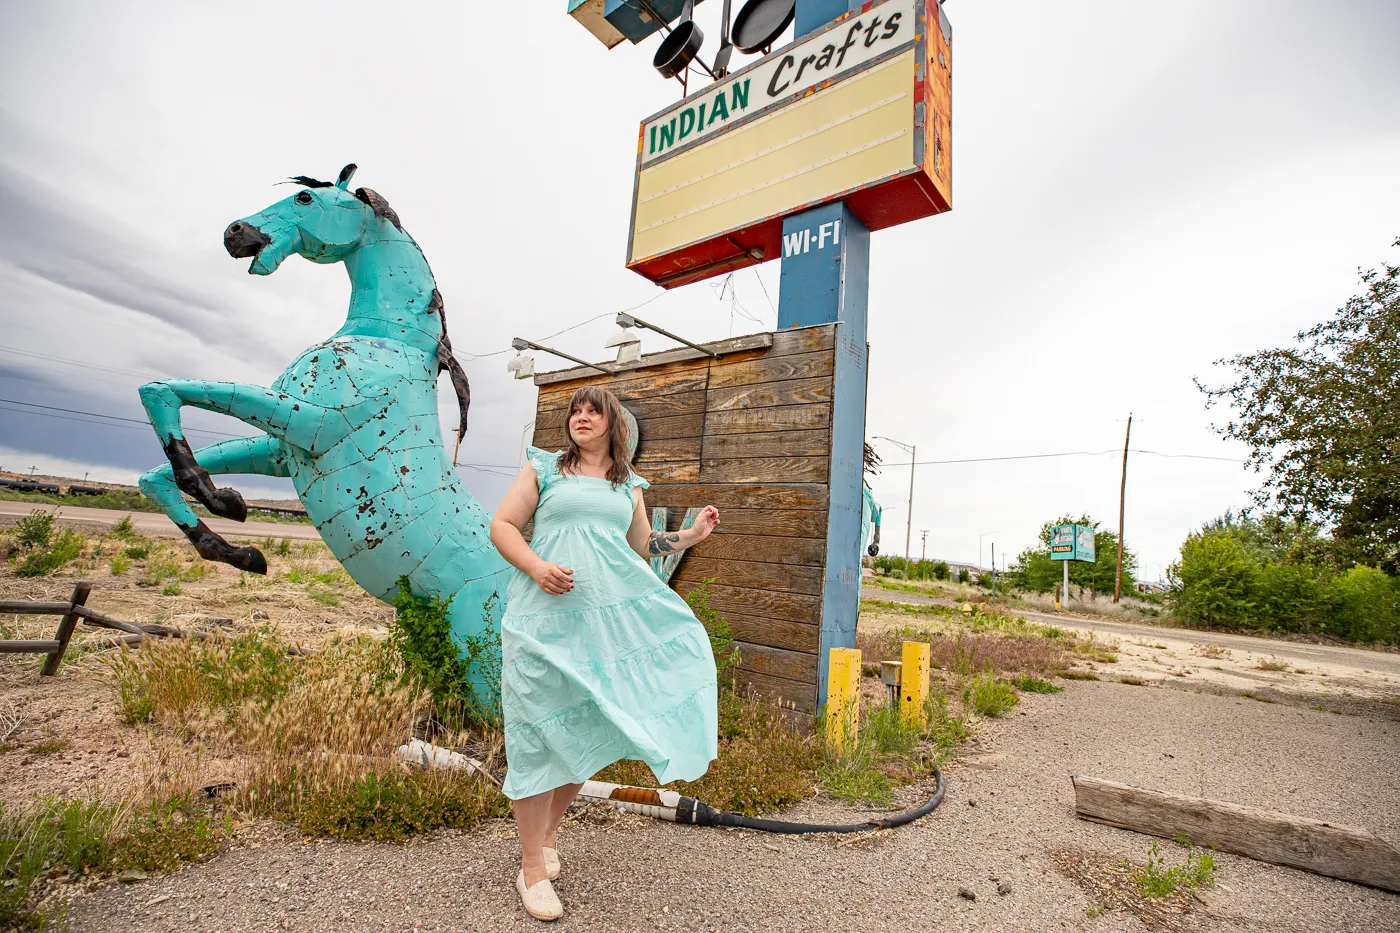 Ranch Kitchen Turquoise Horses in Gallup, New Mexico Route 66 Roadside Attraction